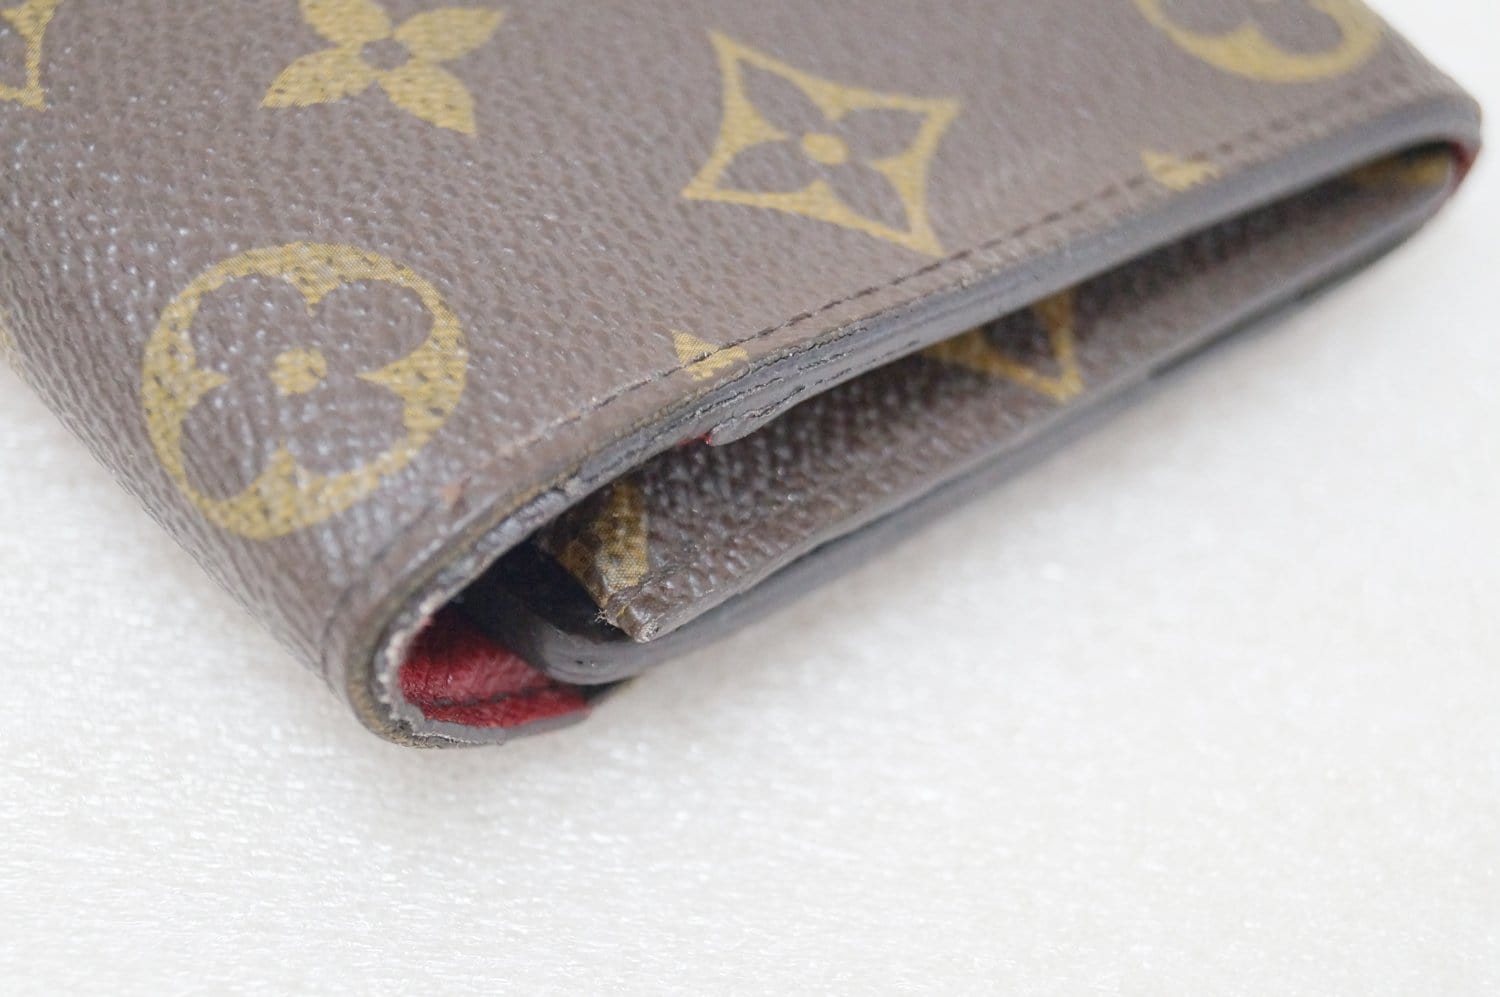 Sarah Wallet Monogram - Wallets and Small Leather Goods